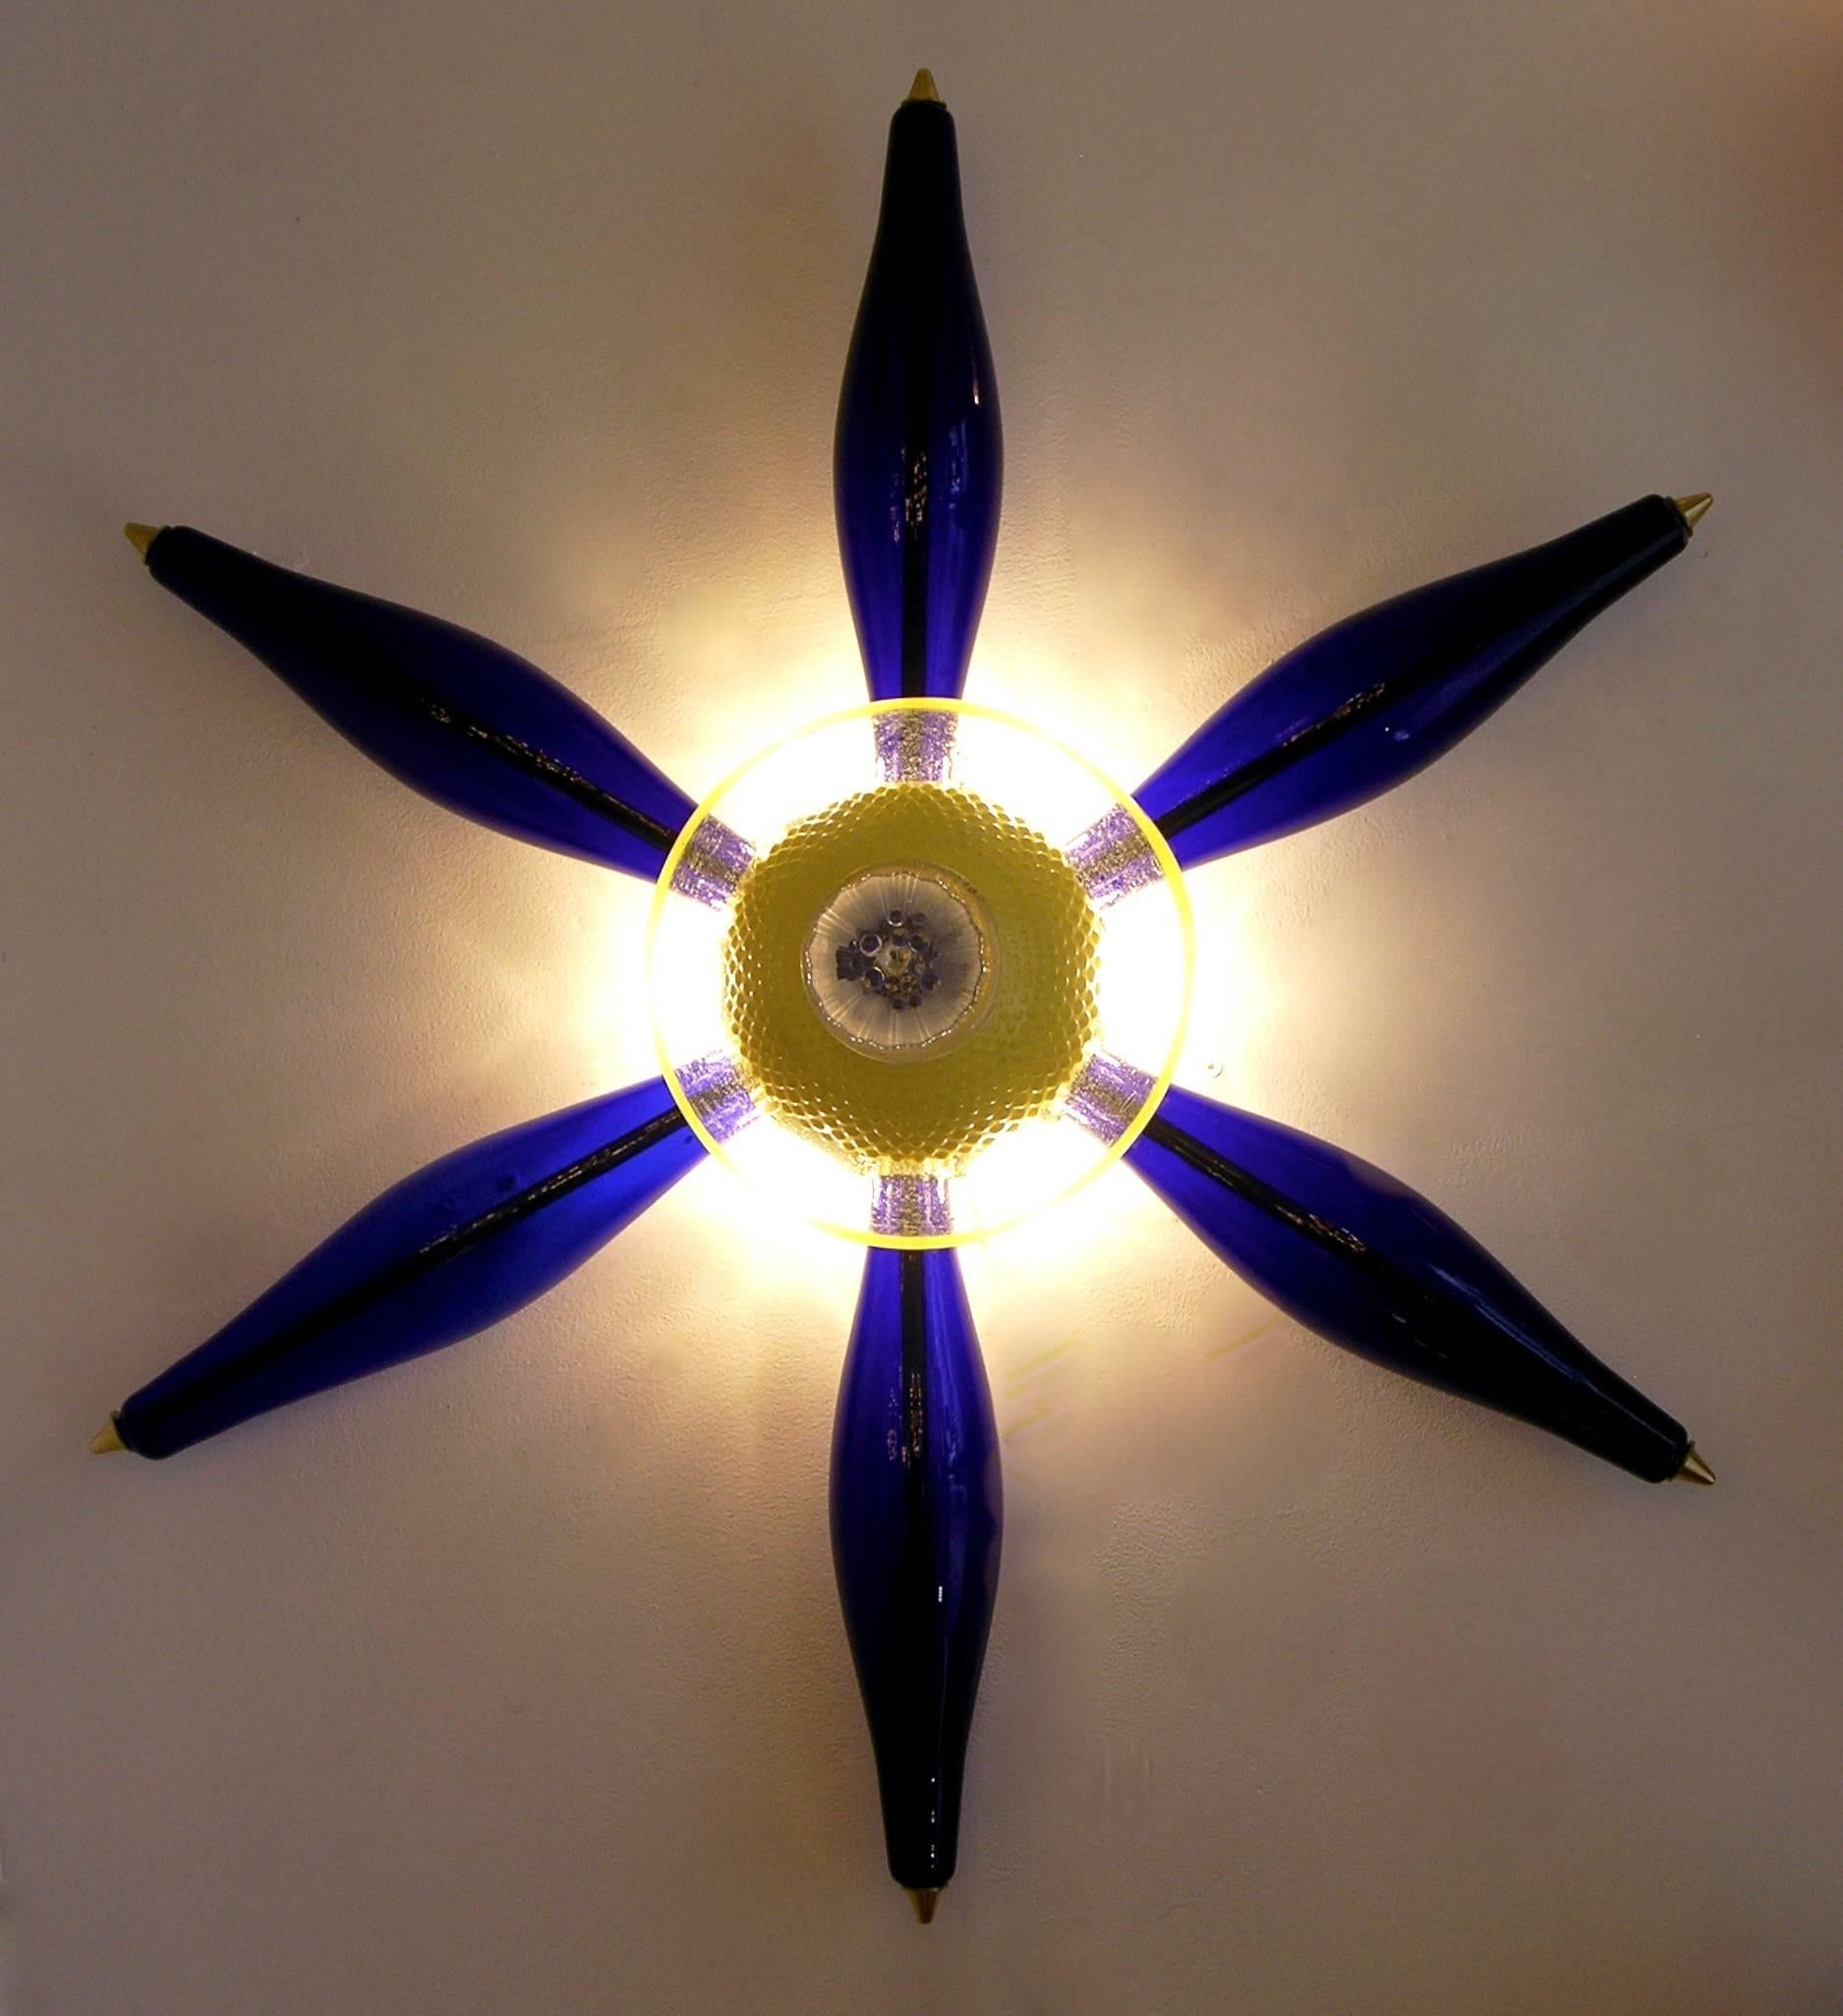 One-of-a-kind Italian design unusual wall lights, in the shape of a flower or six-point star. Six very rare blown blue Murano glass elements, jutting out of a precious core consisting of yellow and clear Murano glass components executed through